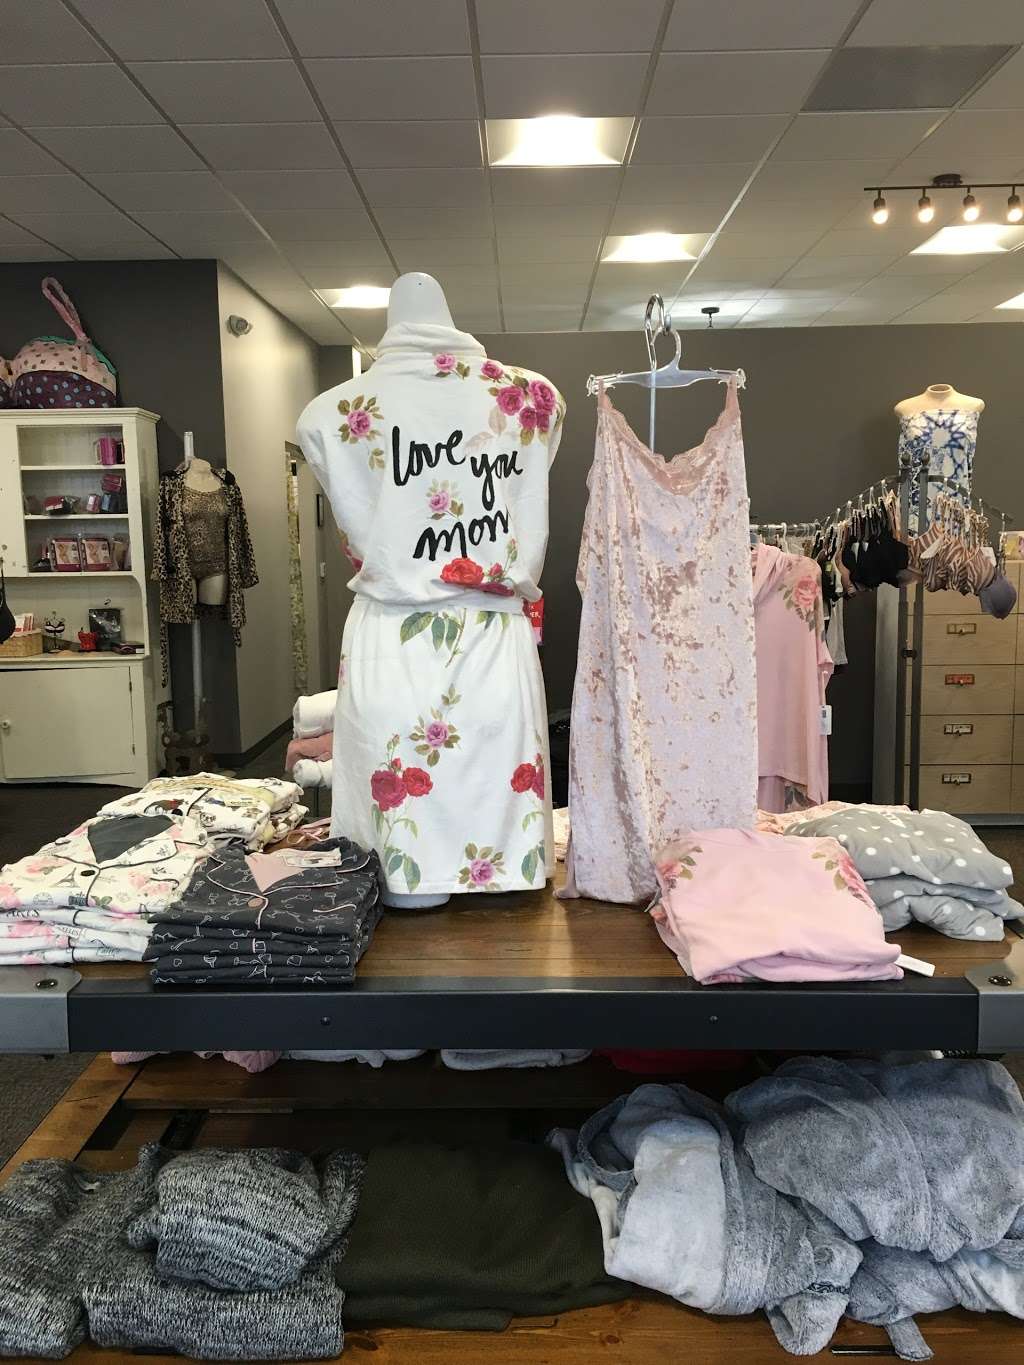 Jay Ann Intimates | 1954 County Line Rd, Huntingdon Valley, PA 19006 | Phone: (215) 942-0120